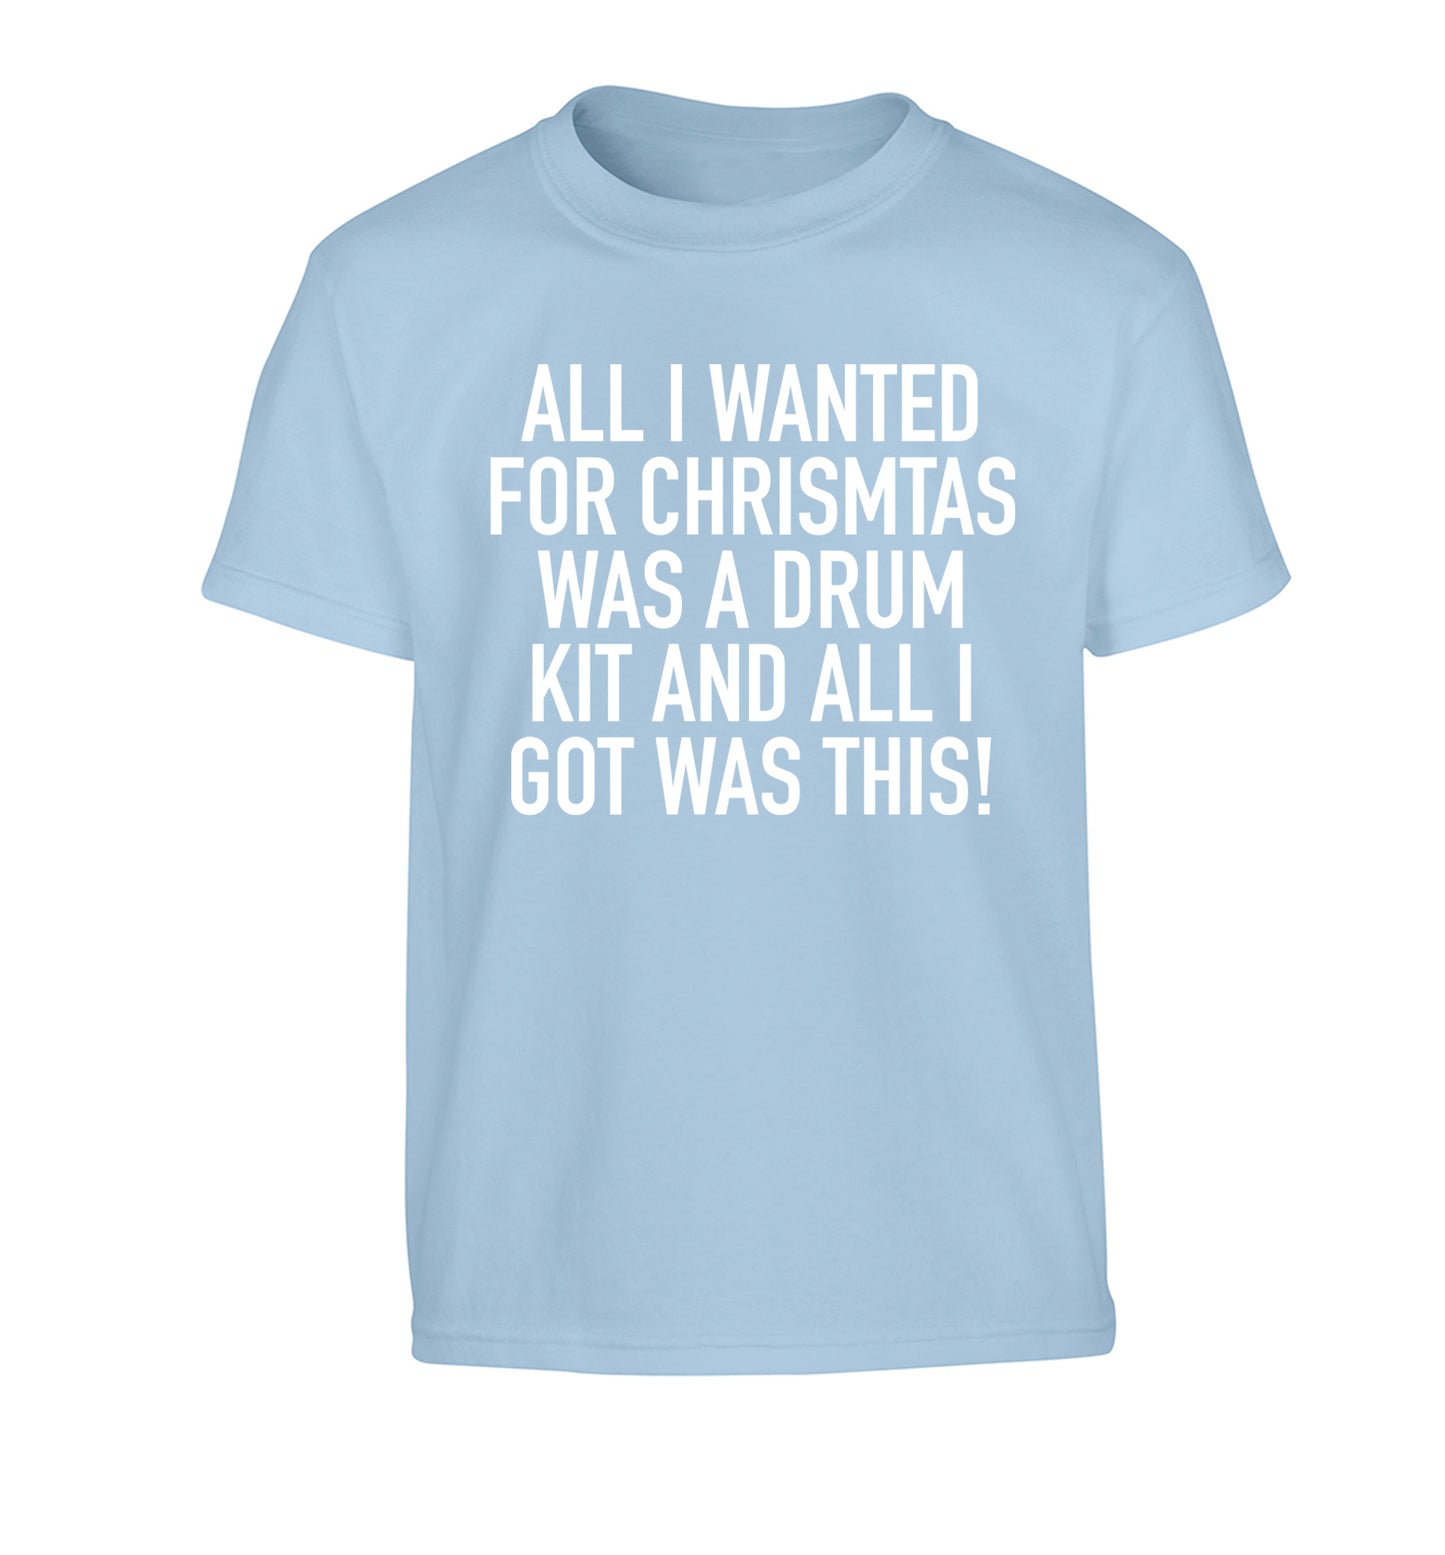 All I wanted for Christmas was a drum kit and all I got was this! Children's light blue Tshirt 12-14 Years